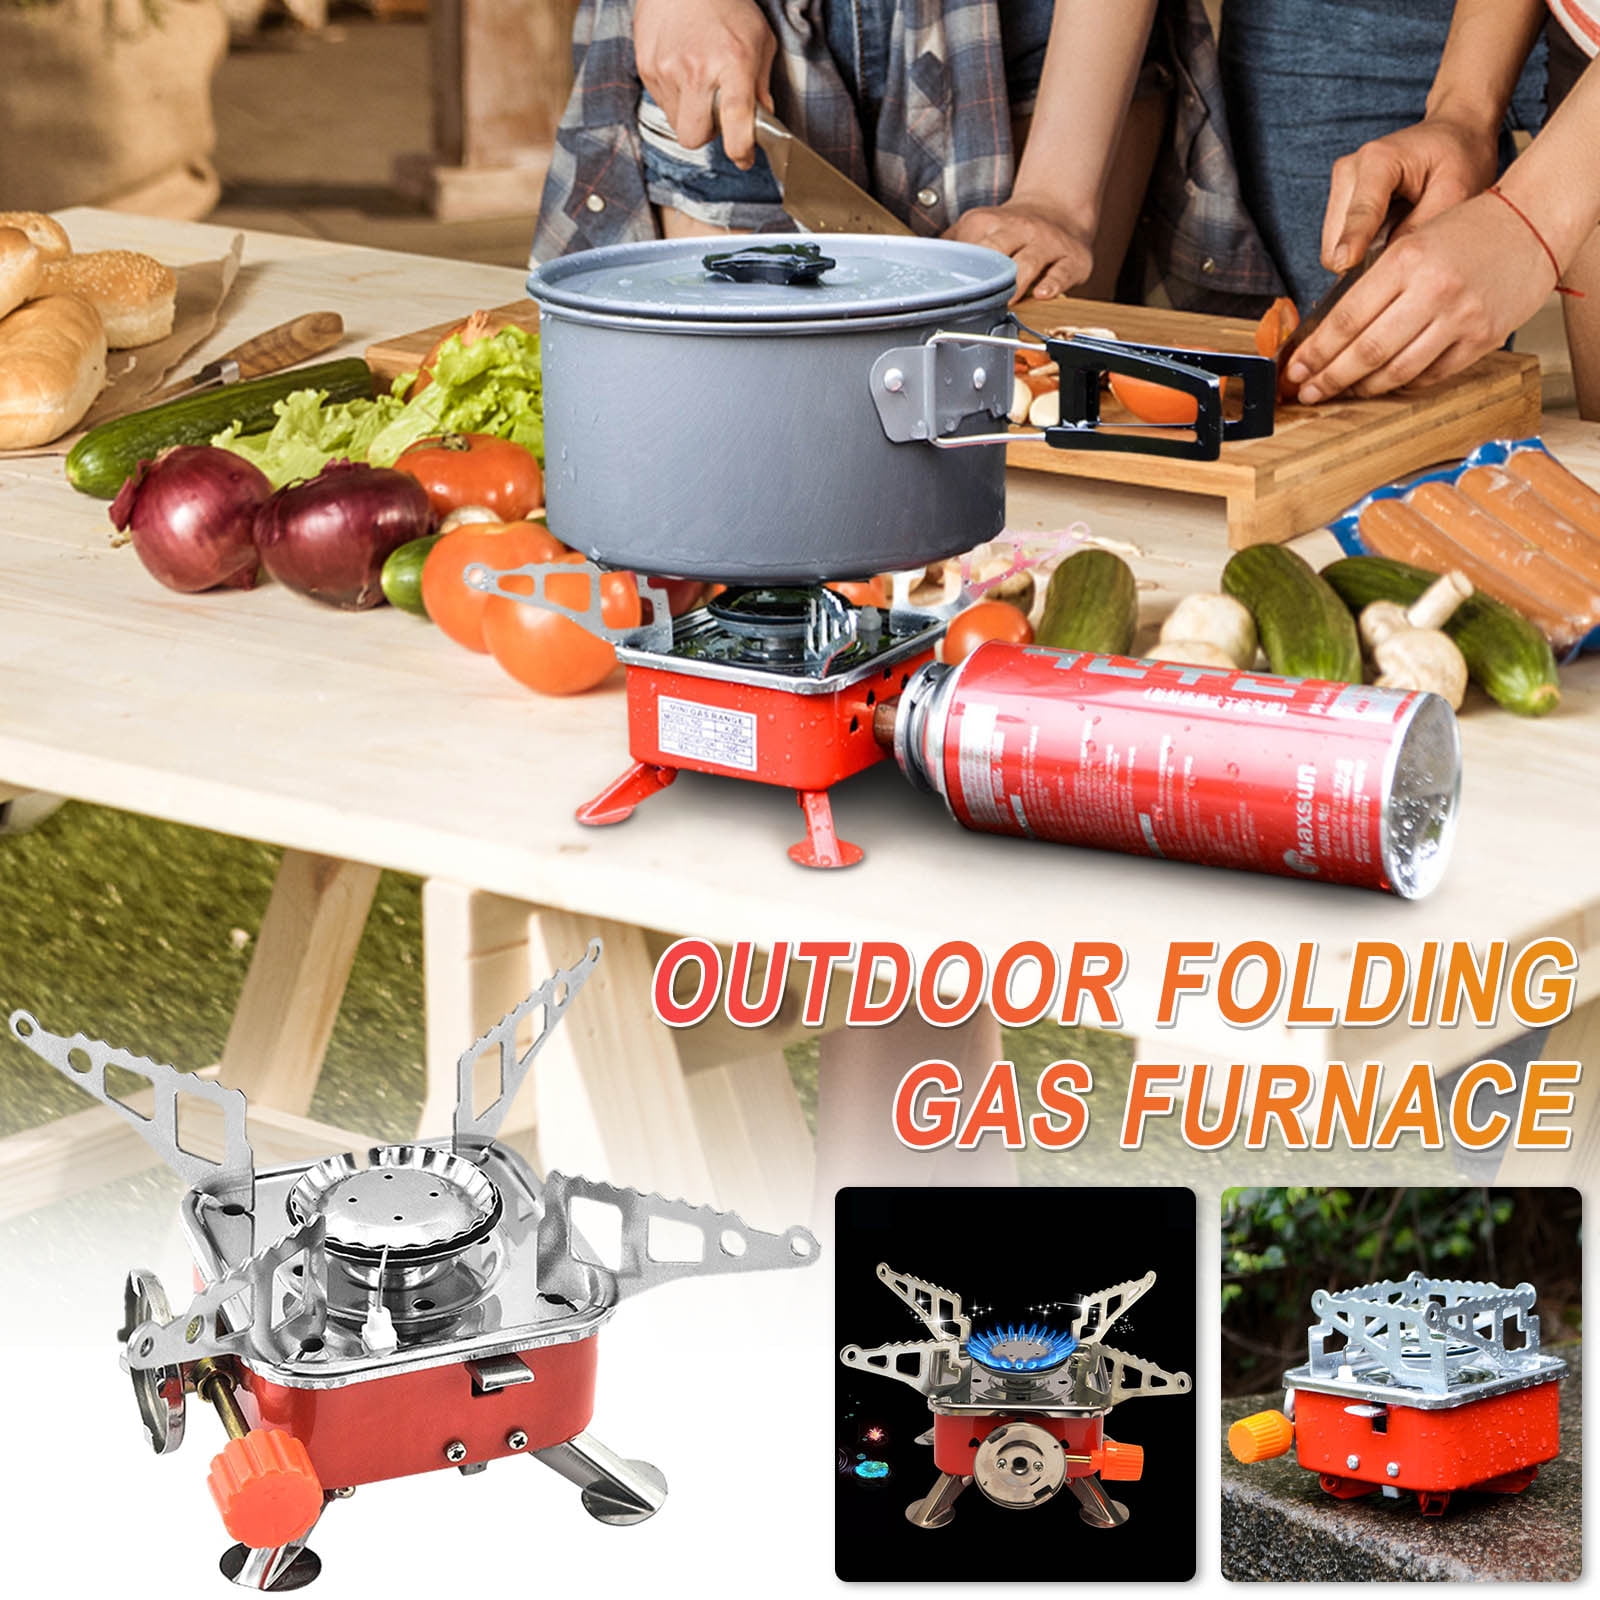 Mini Square Camping Stove,compact folding, wind proof, Piezo Ignition, Use  with butane gas tank, Very Perfect for outdoor backpacking, picnics, hiking